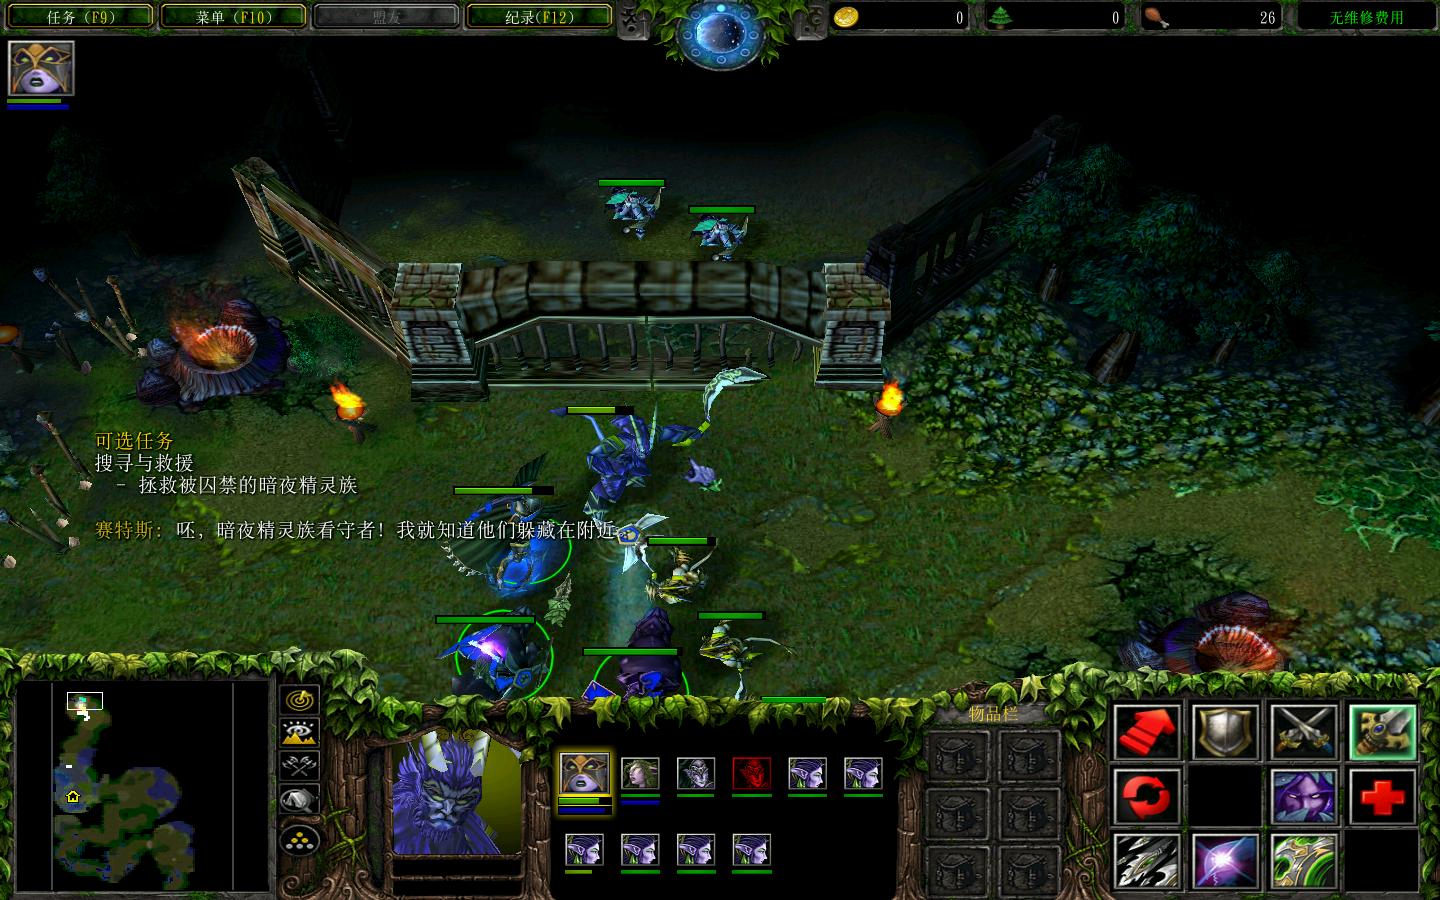 ħ3Warcraft III The Frozen Throne1.24-1.27aӰ֮ v1.4ǿ